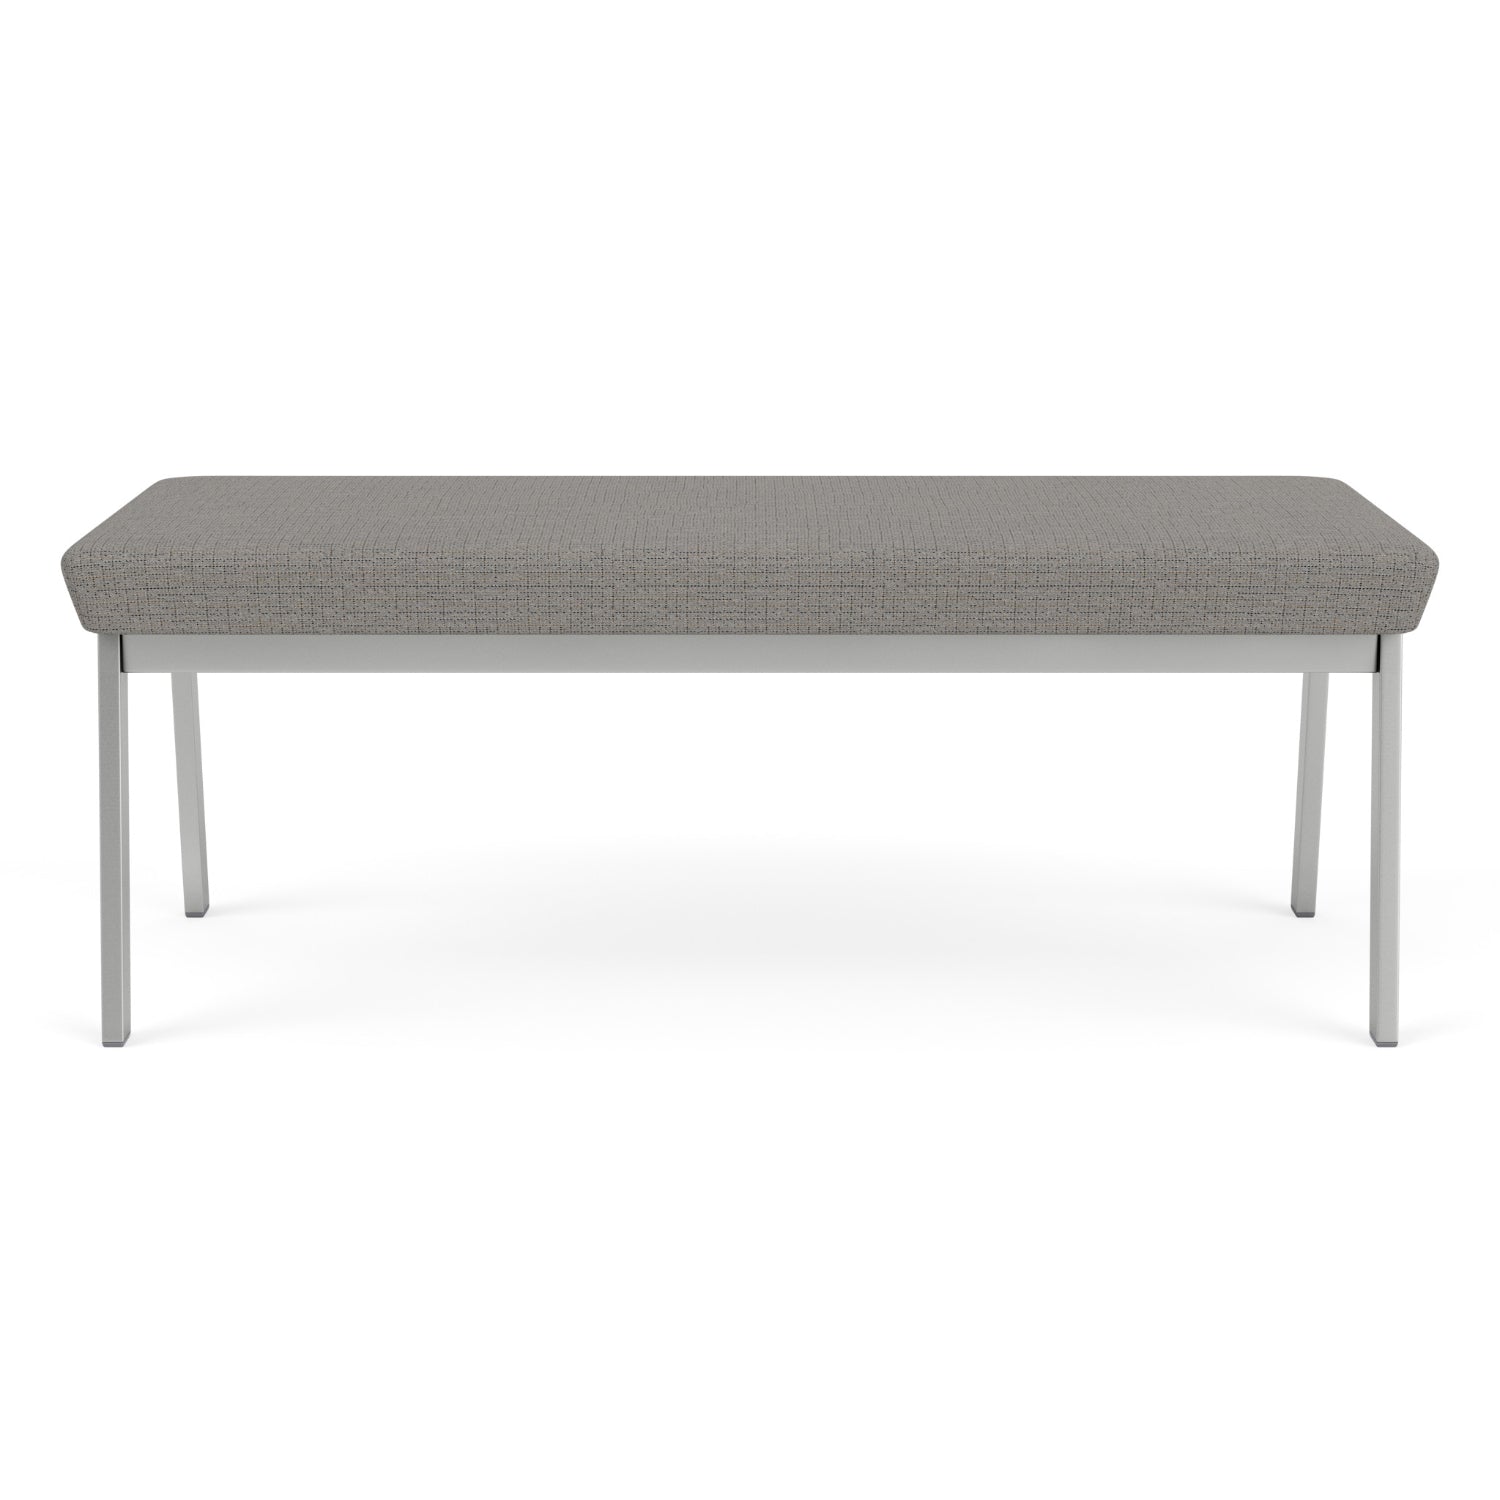 Newport Collection Reception Seating, 2 Seat Bench, Designer Fabric Upholstery, FREE SHIPPING